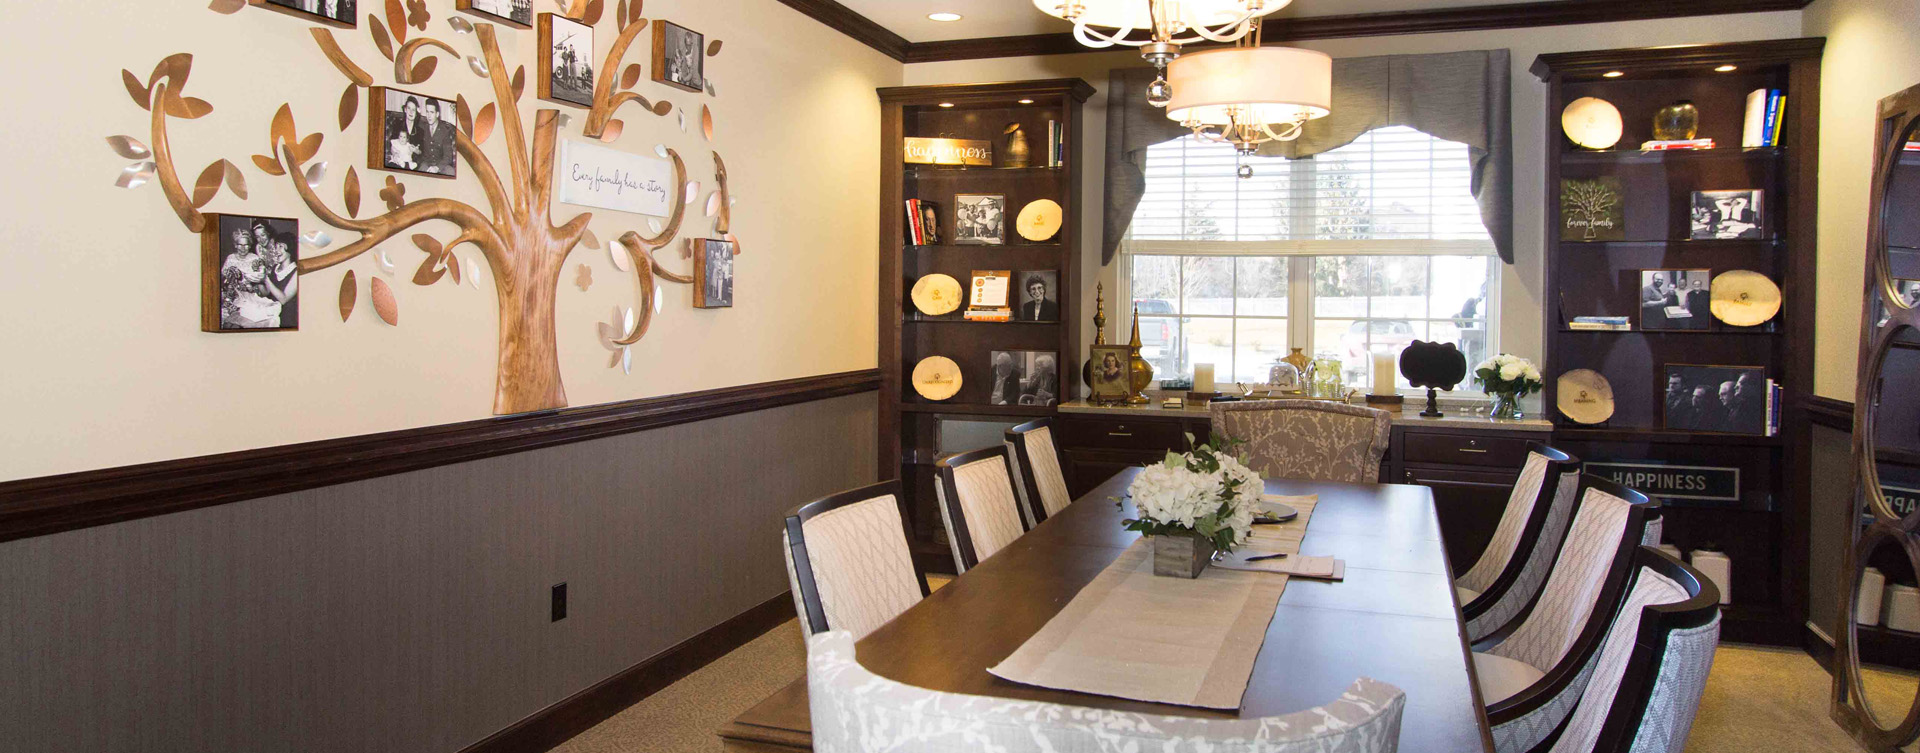 Celebrate special occasions in the private dining room at Bickford of Gurnee